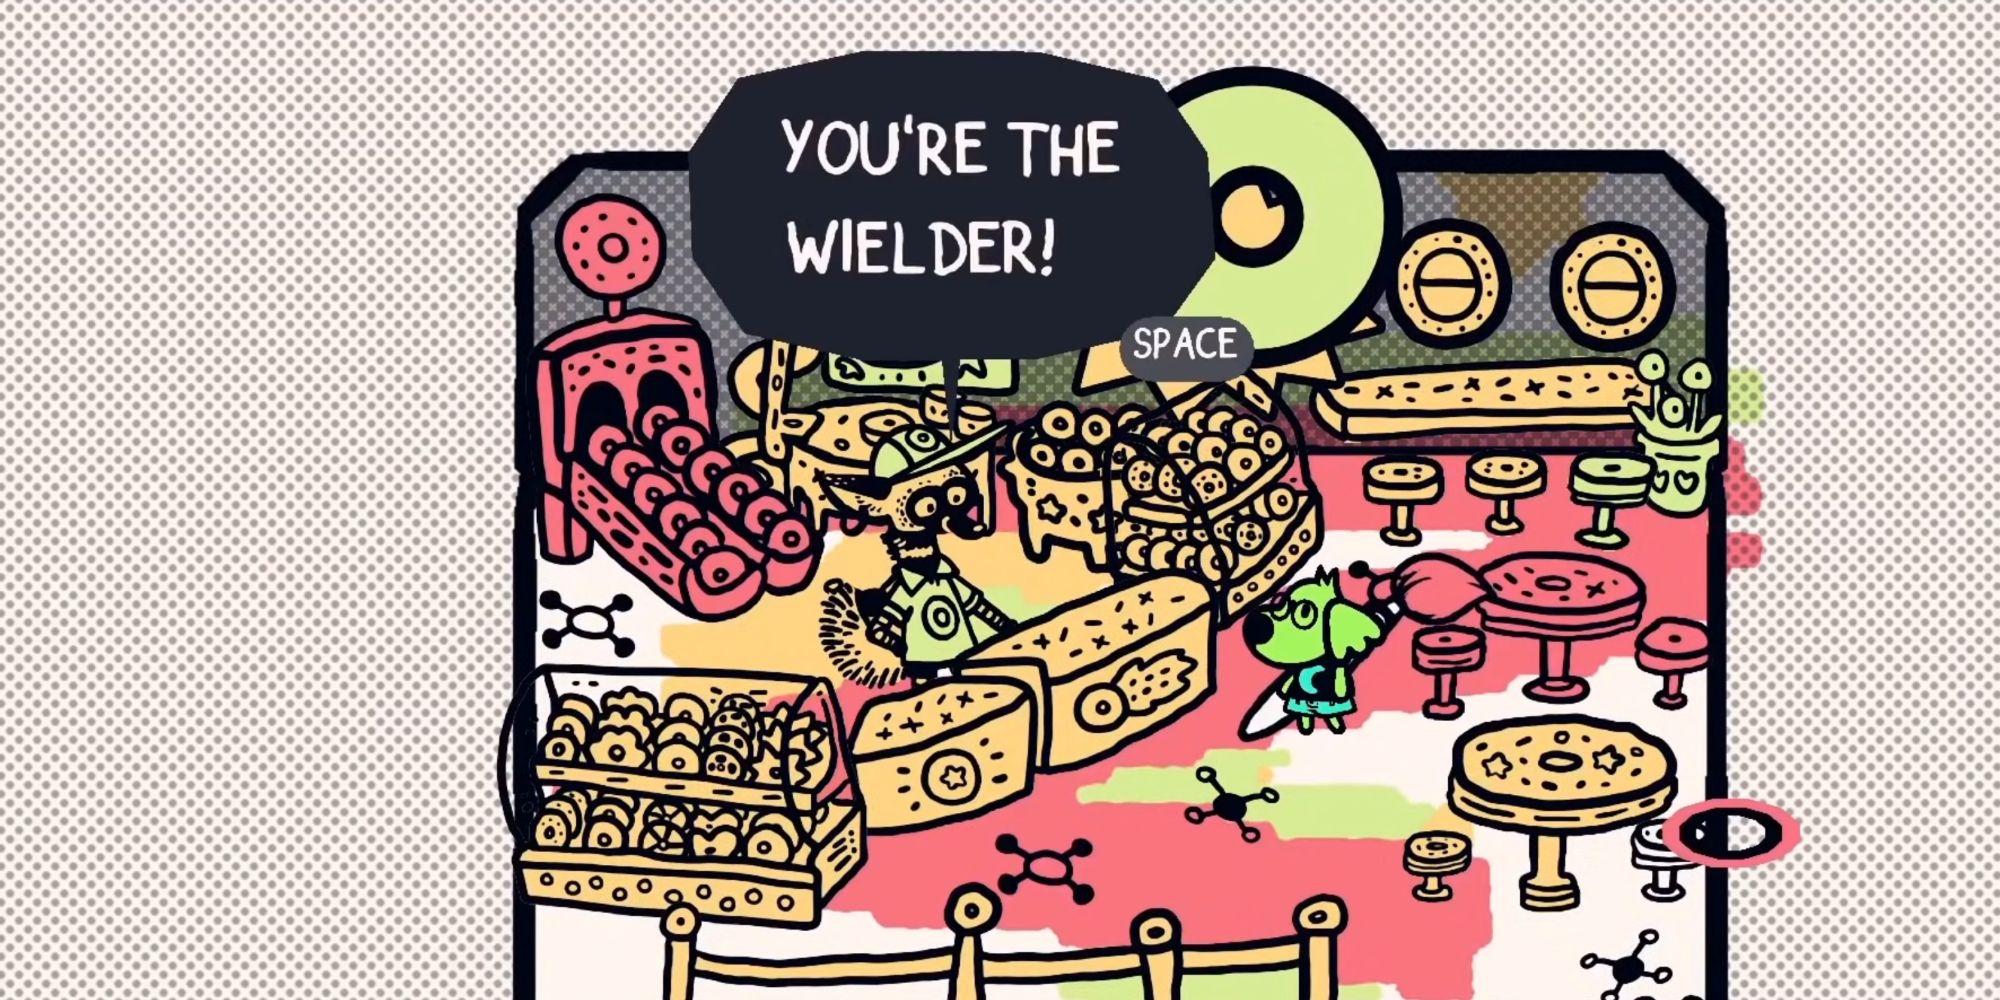 A screenshot from Chicory, showing a bakery employee reacting with excitement upon finding out that the player character is the brush wielder